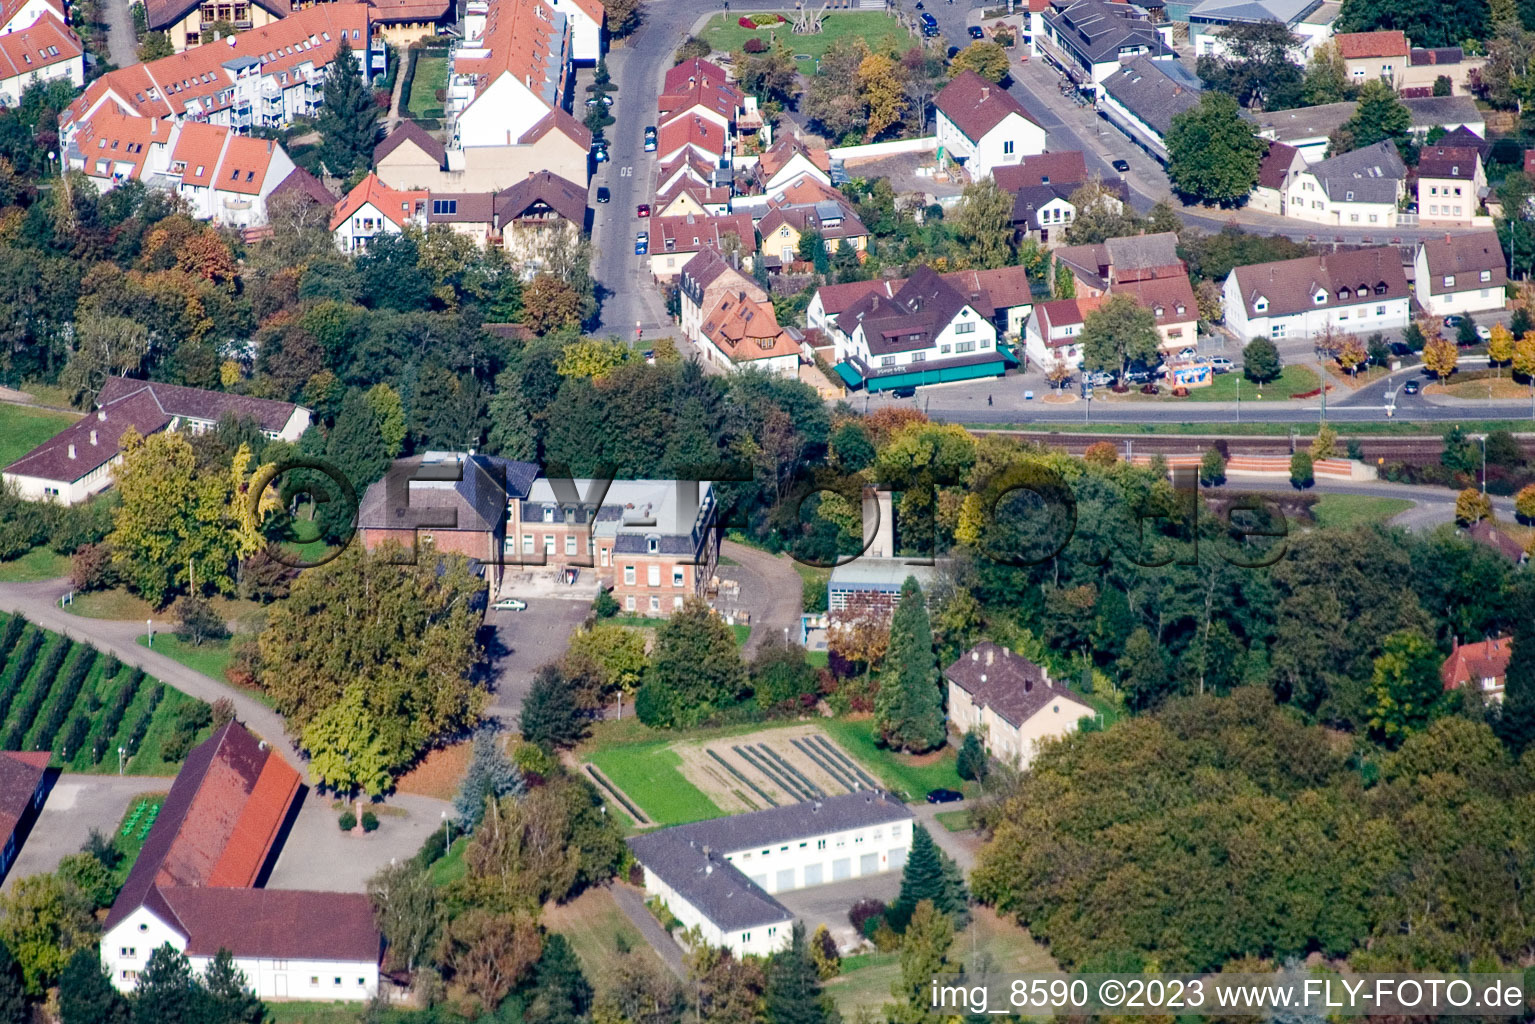 Aerial photograpy of Augustenburg in the district Grötzingen in Karlsruhe in the state Baden-Wuerttemberg, Germany